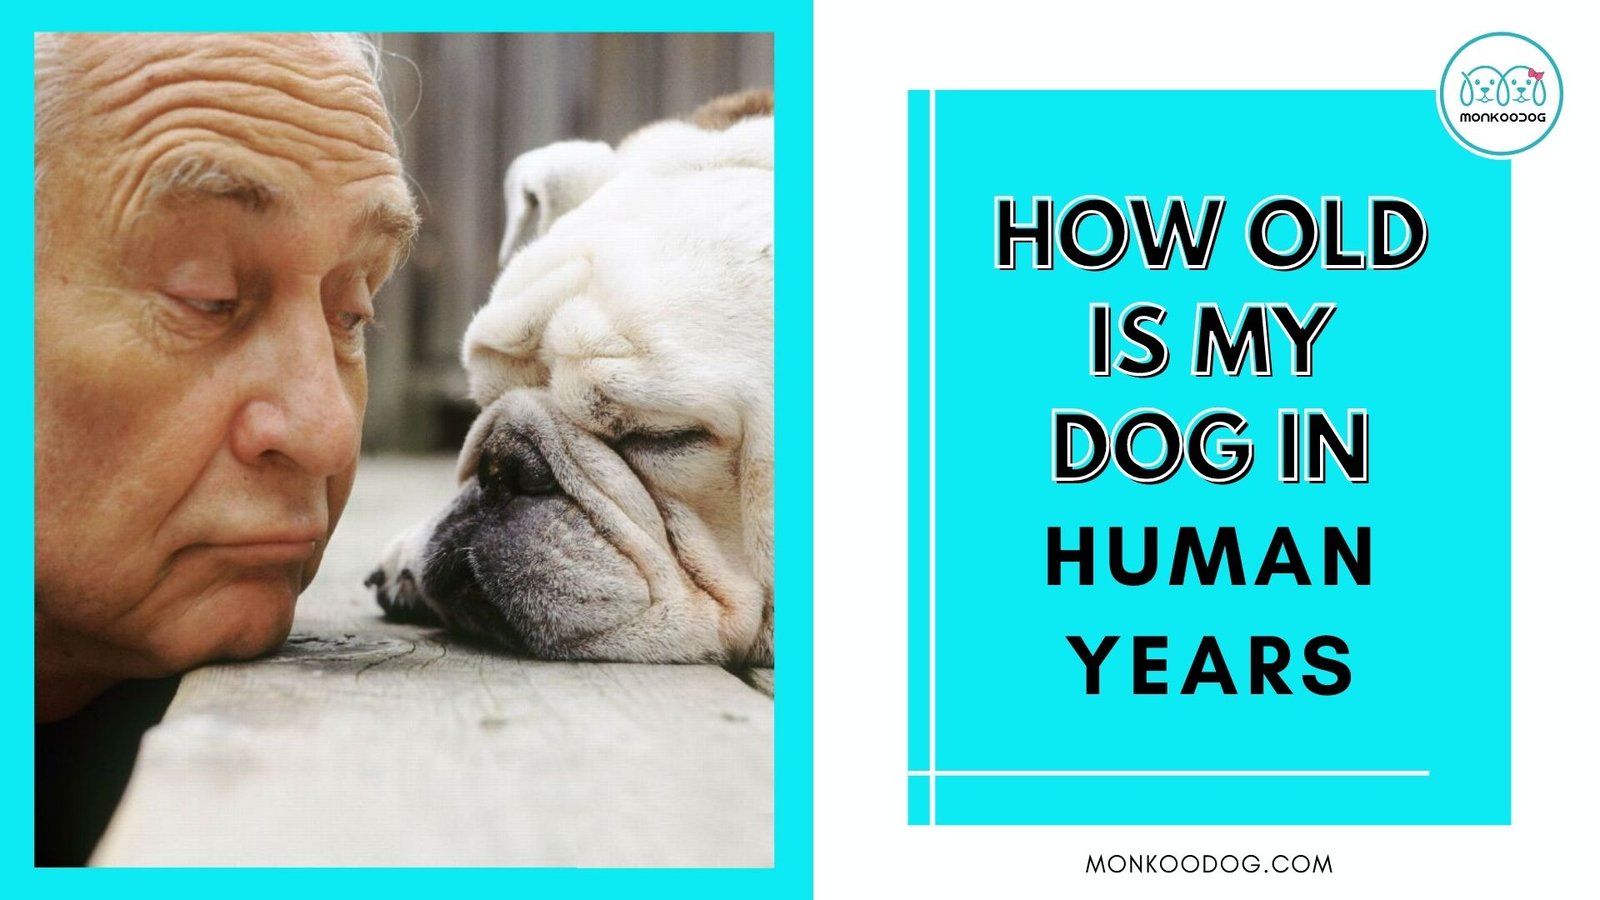 Dog Age Calculator - How old is my dog in human years